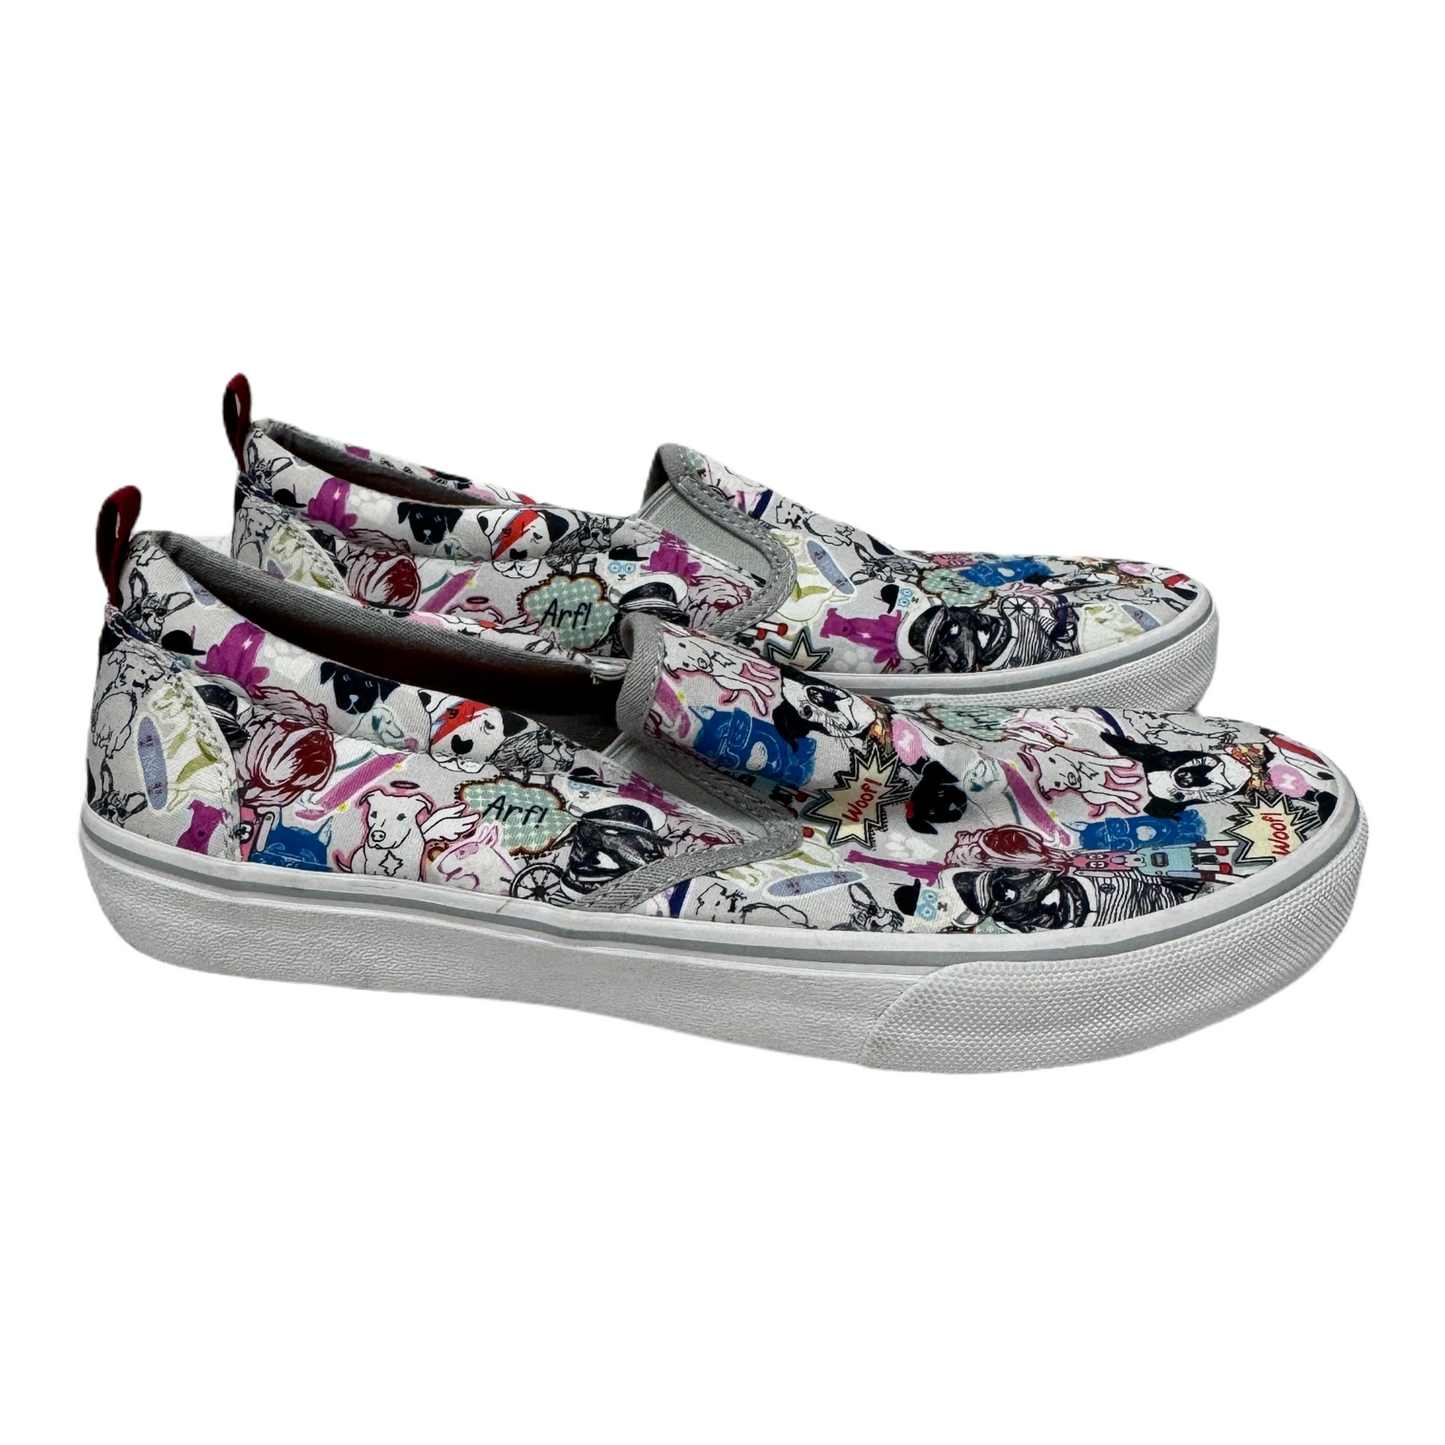 Multi-colored Shoes Sneakers By Bobs, Size: 9.5